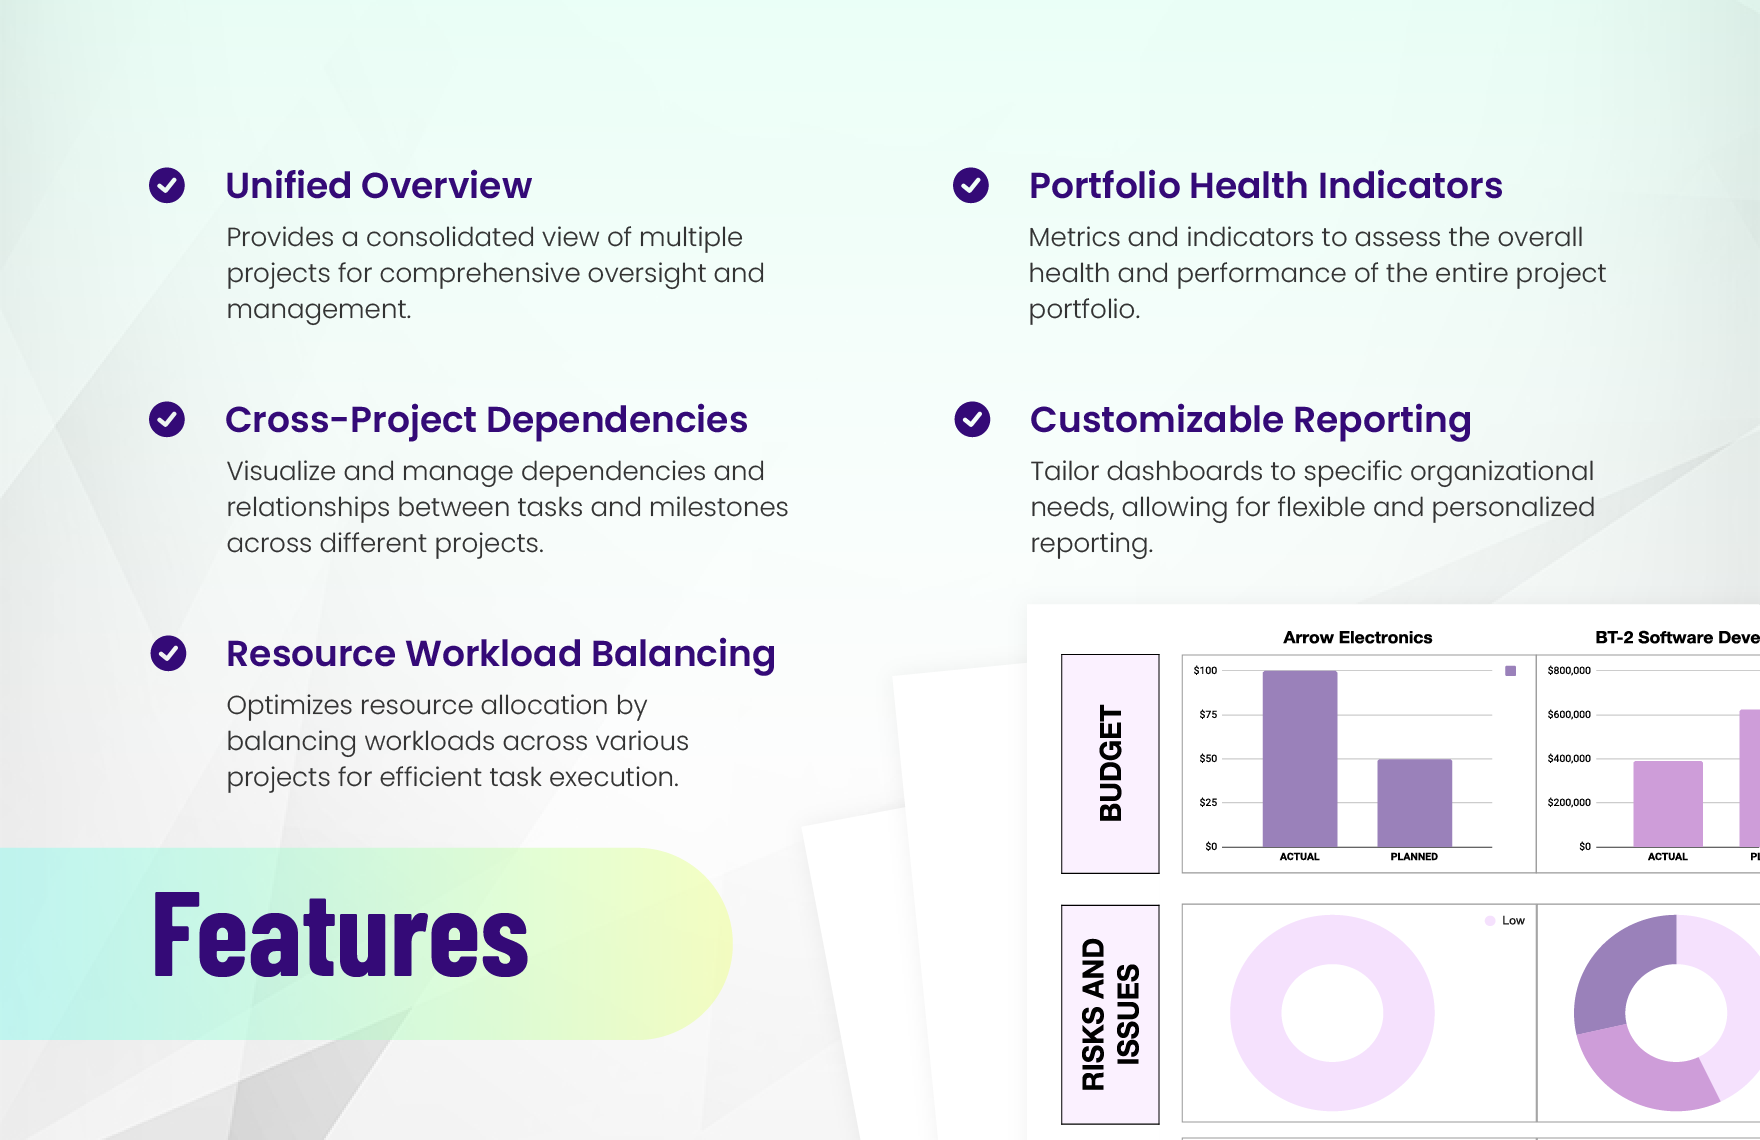 Multiple Project Dashboard Template